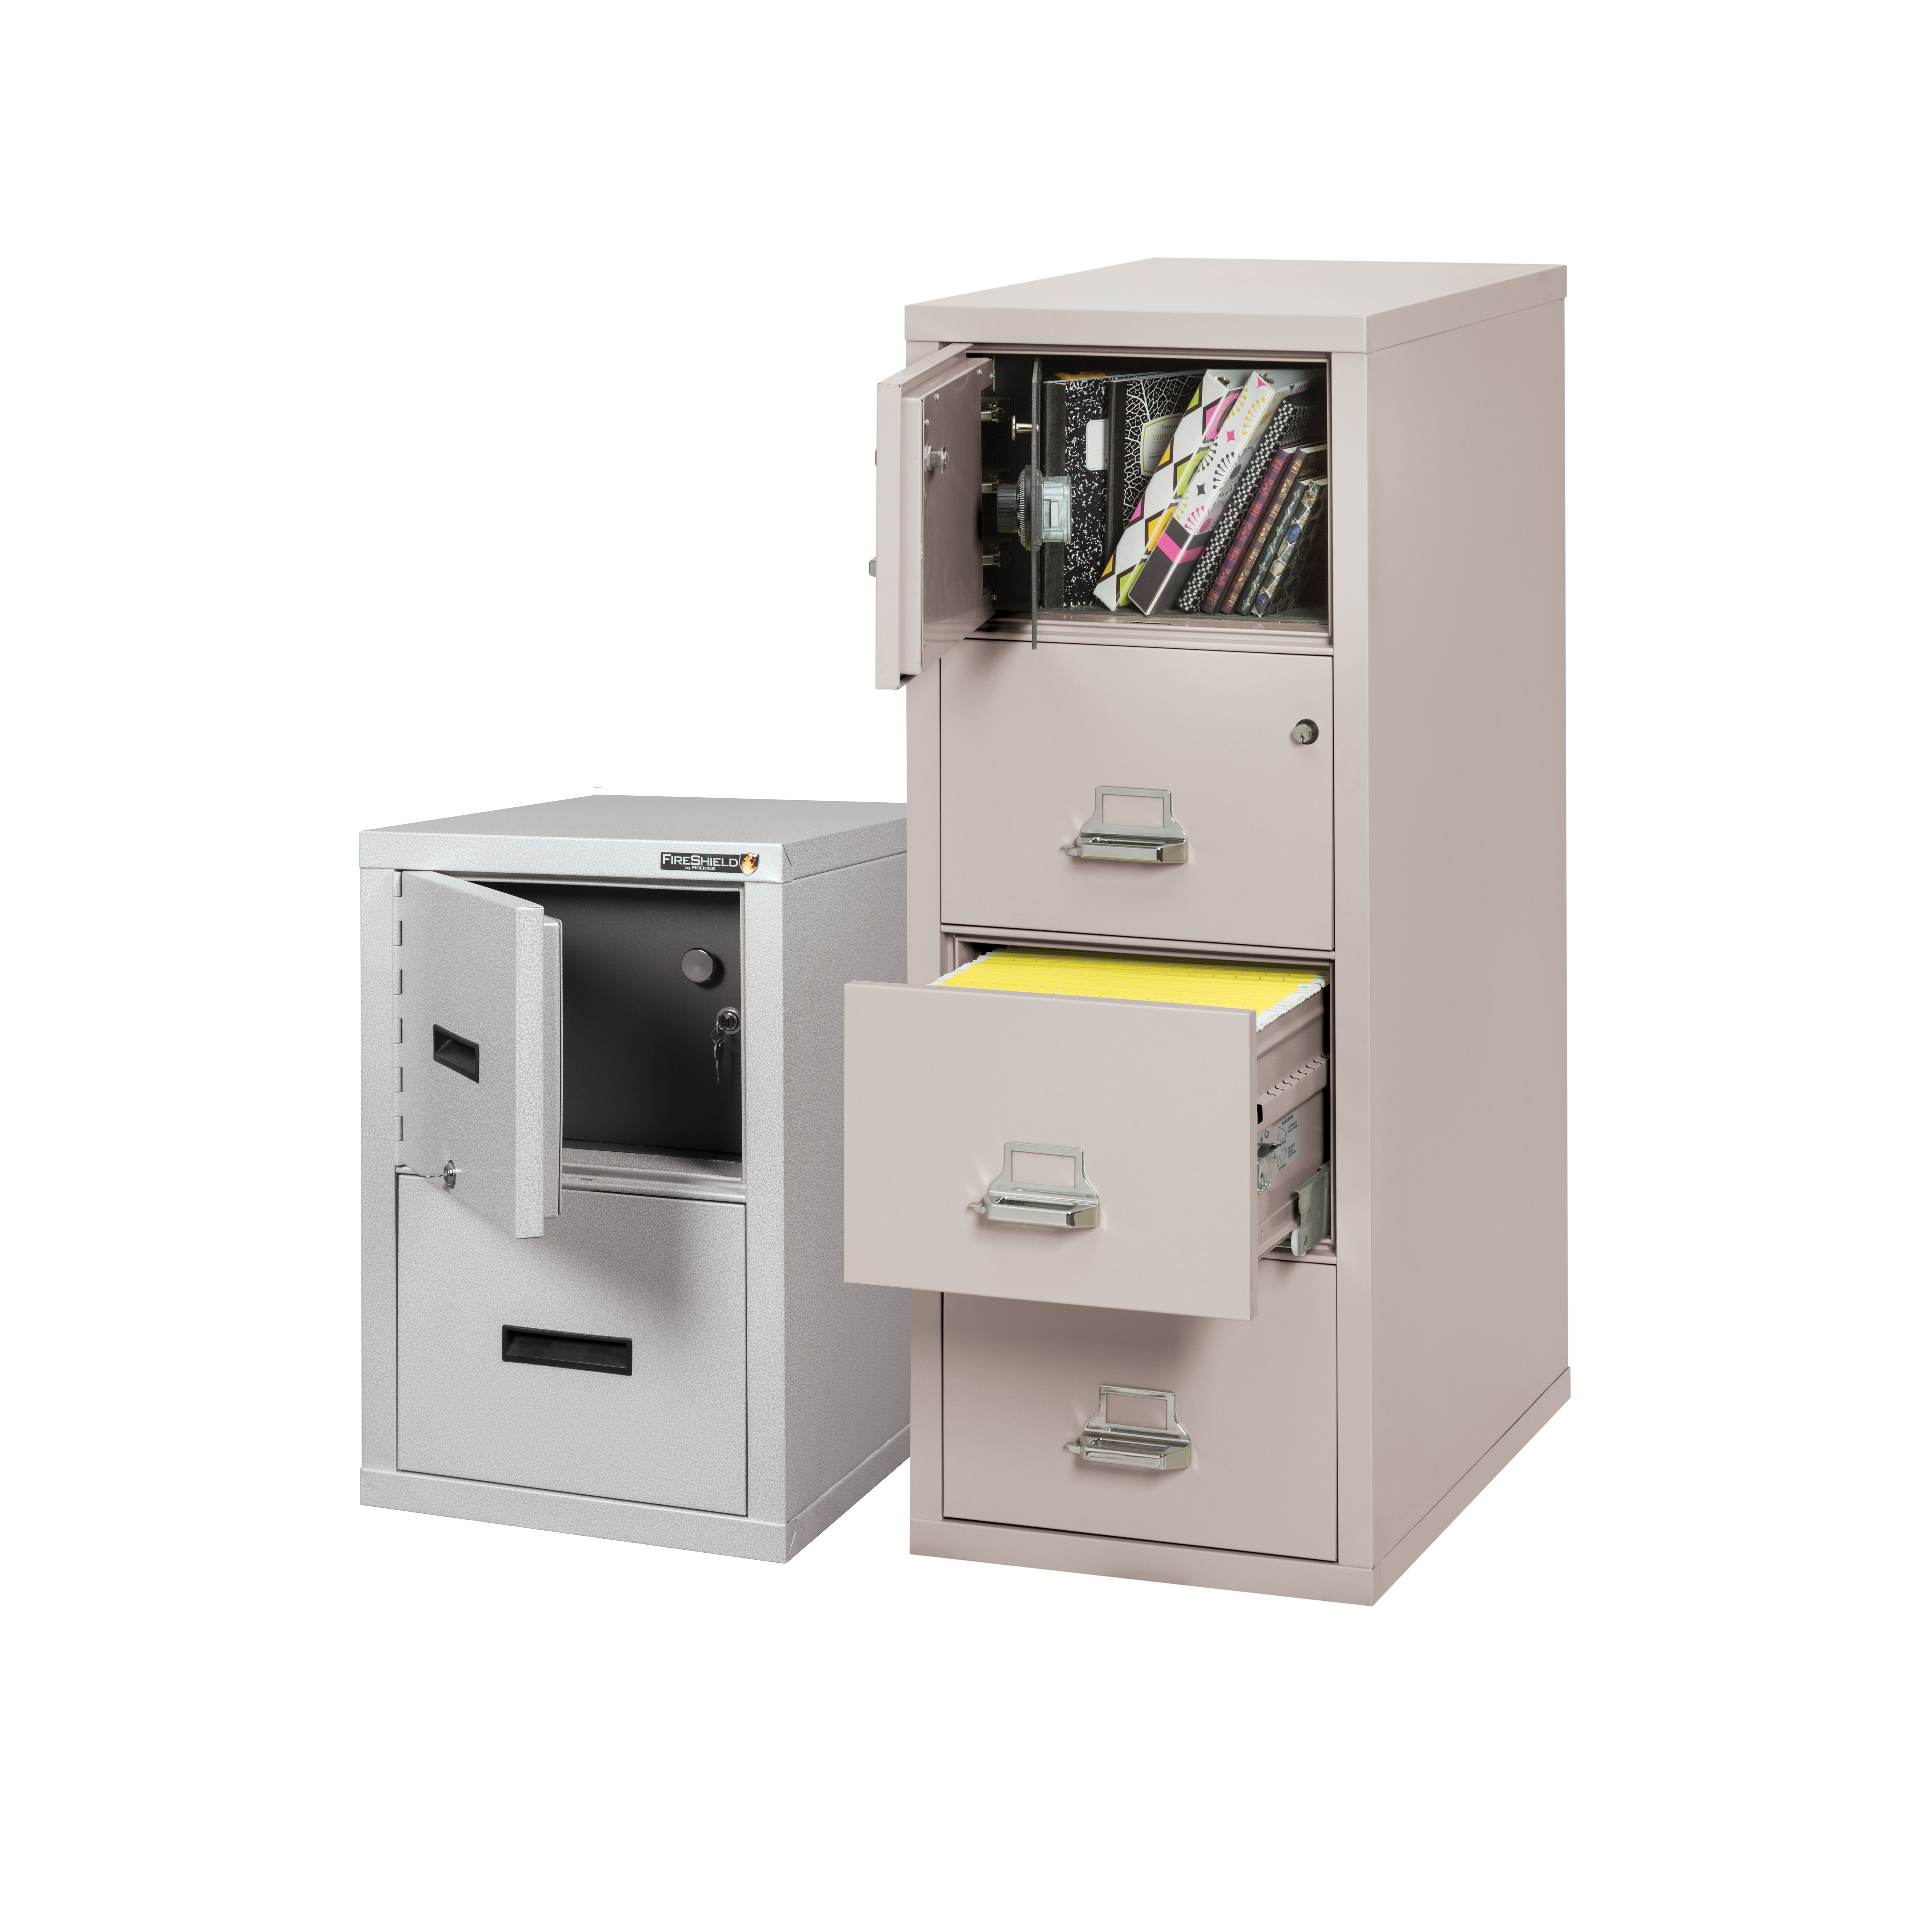 Safe In A File Cabinets Fireking Security Group pertaining to size 6600 X 6600